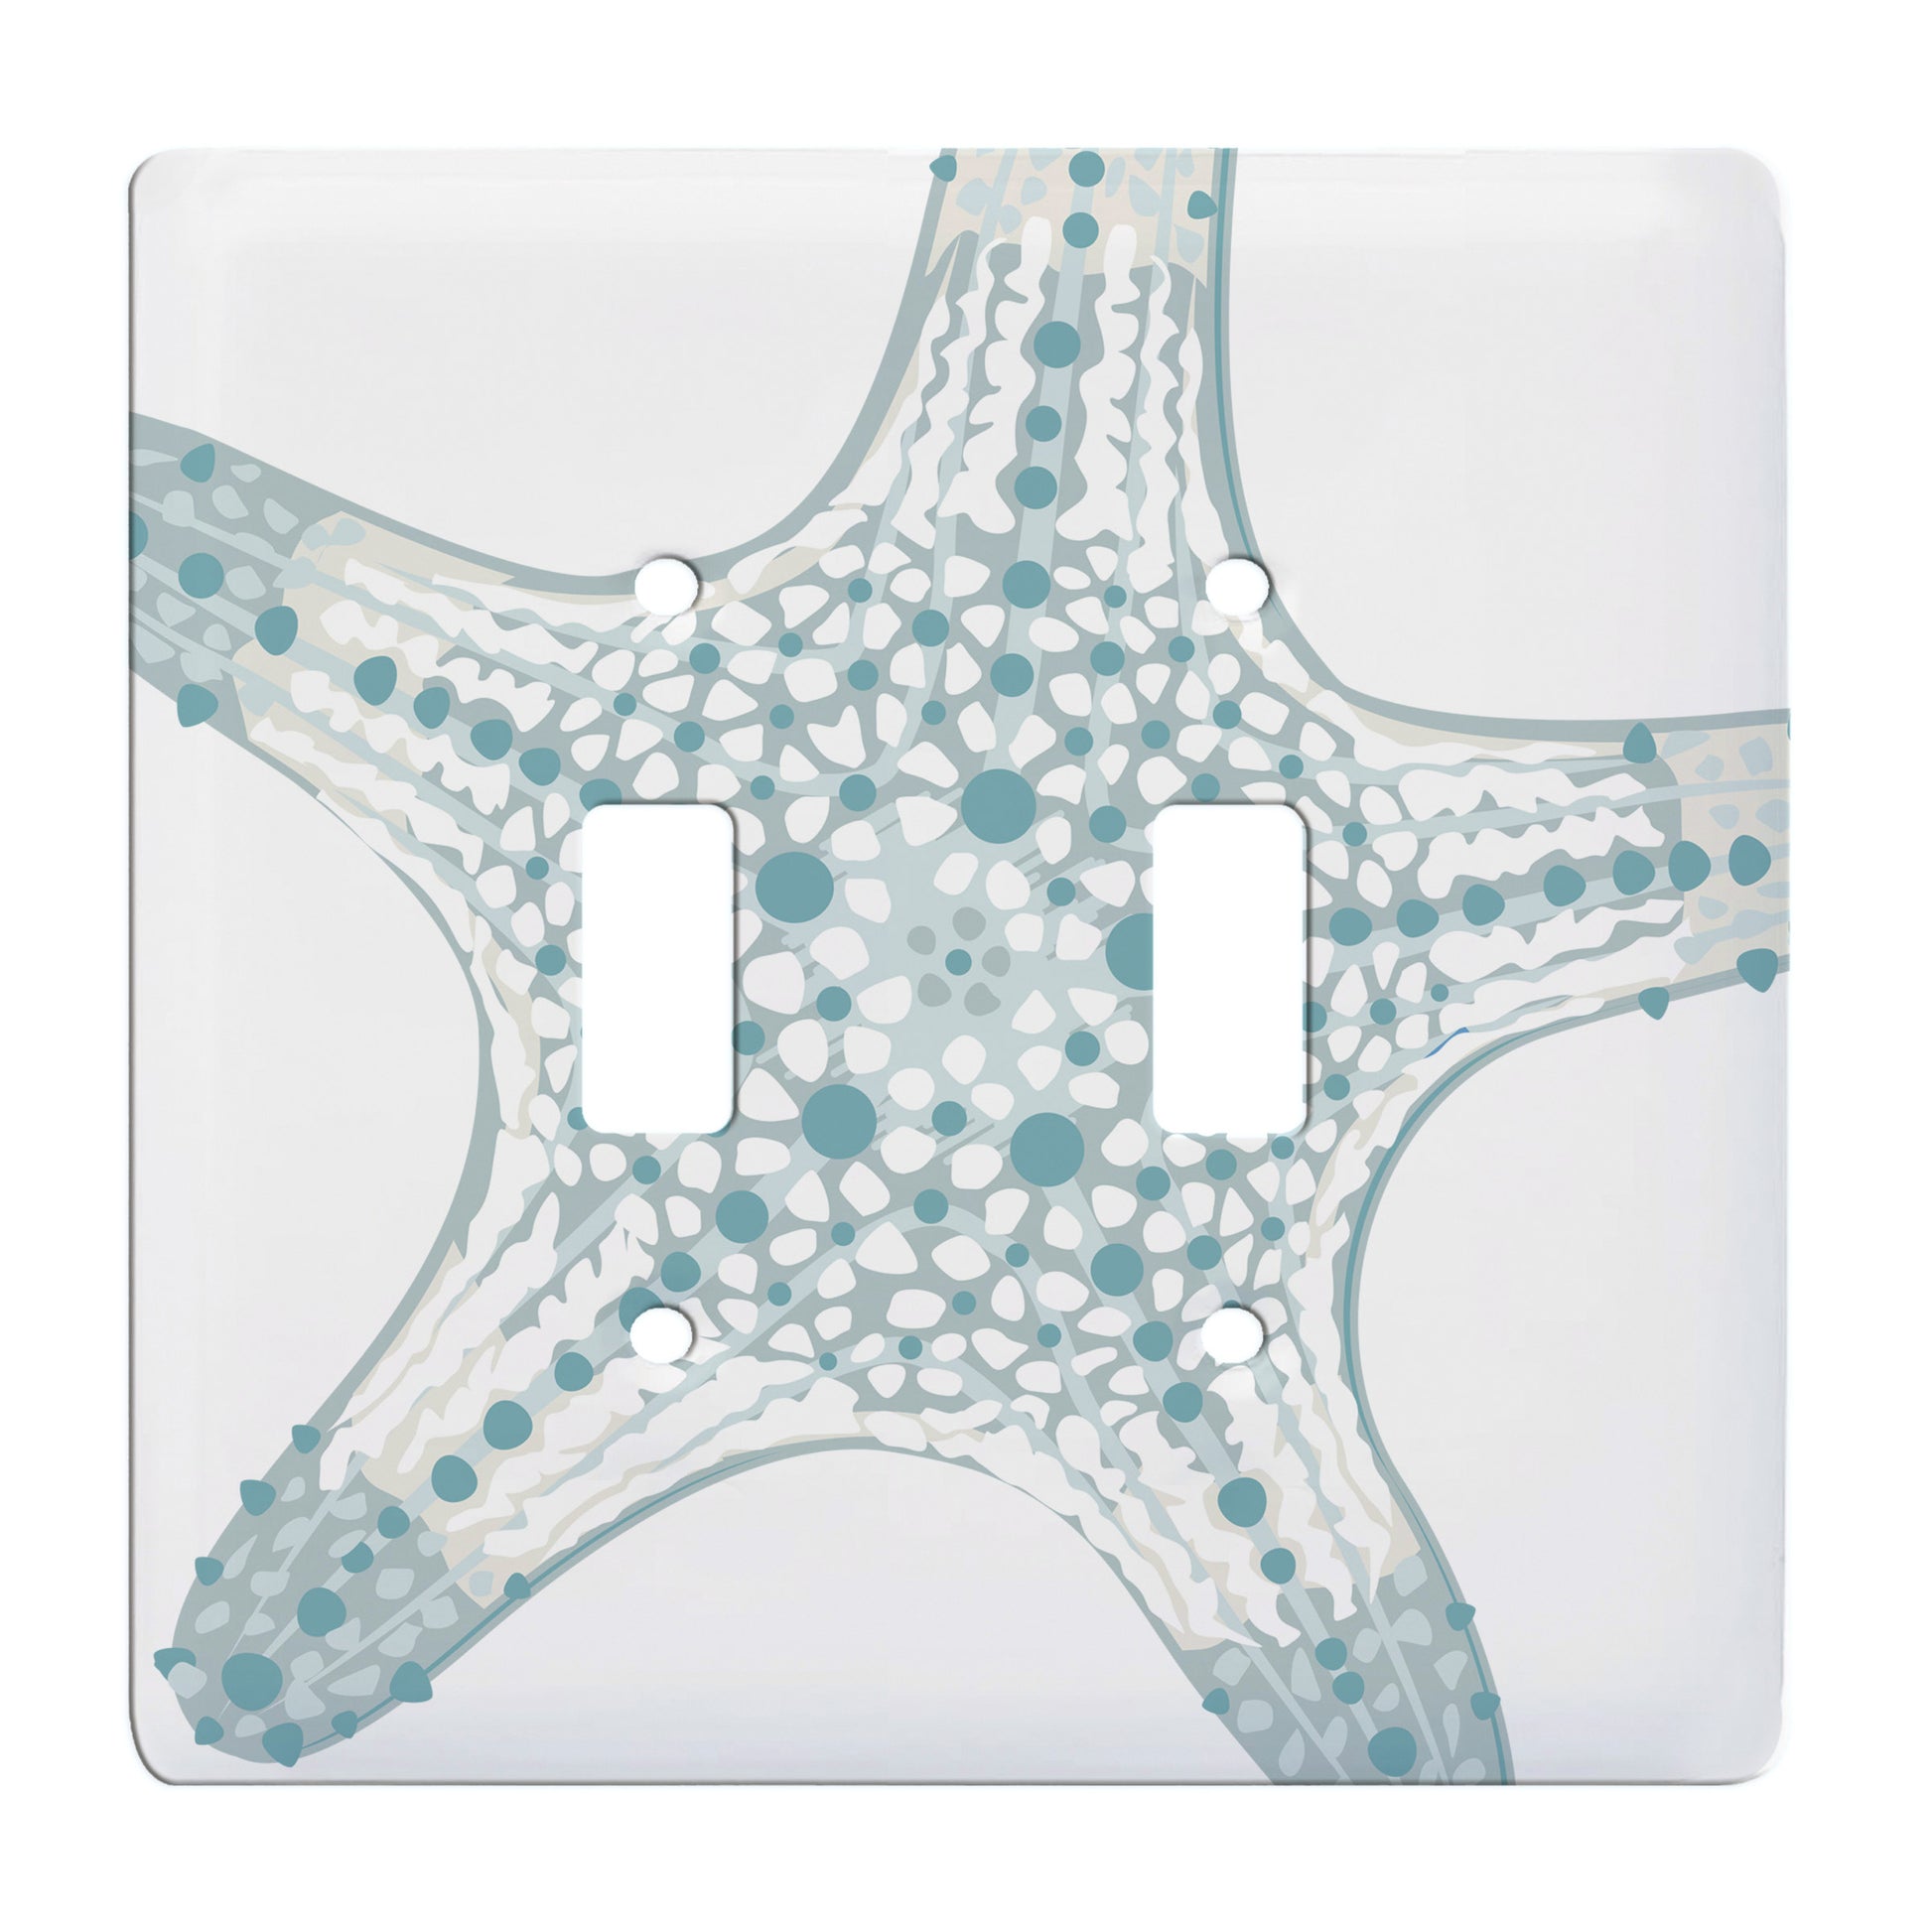 white ceramic double toggle switch plate featuring a teal sea star graphic.